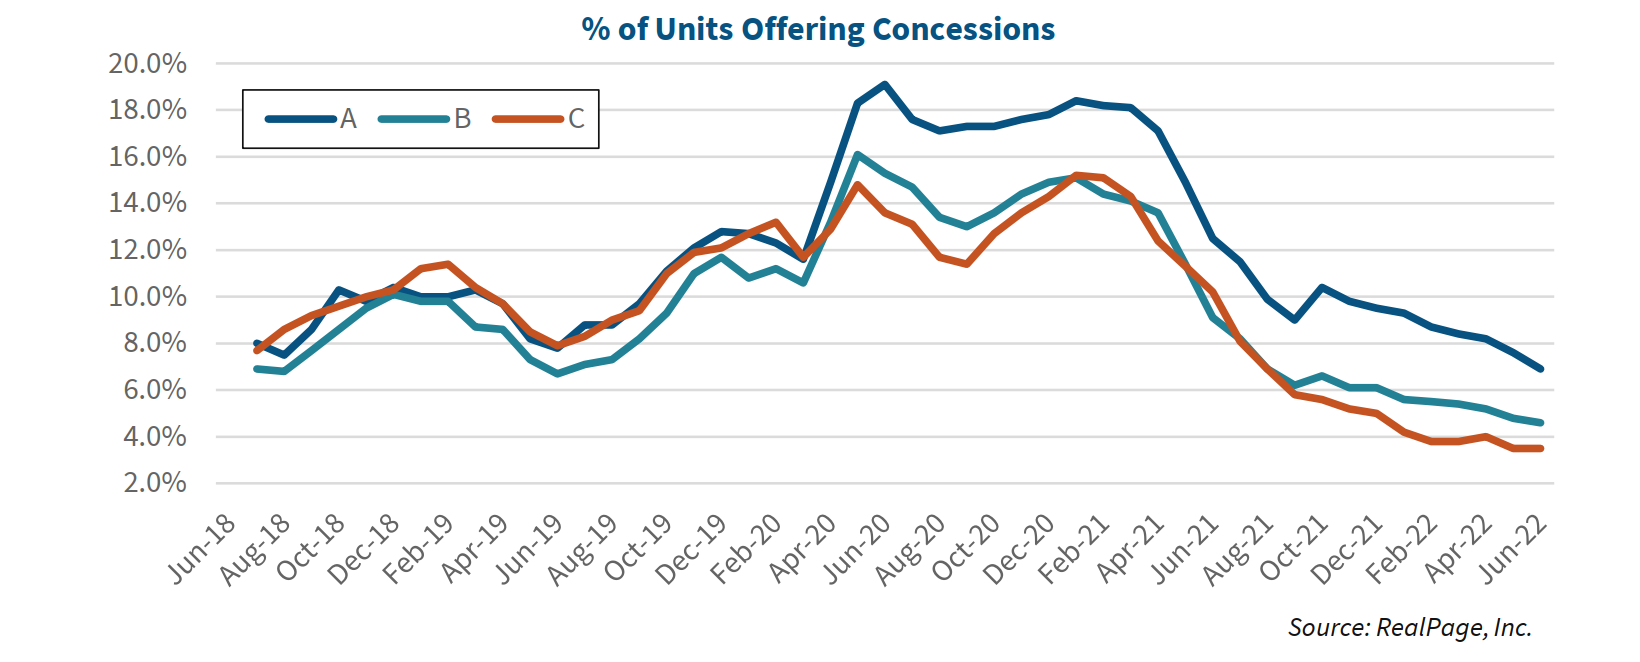 National Concession Rates by Class - % of Units Offering Concessions